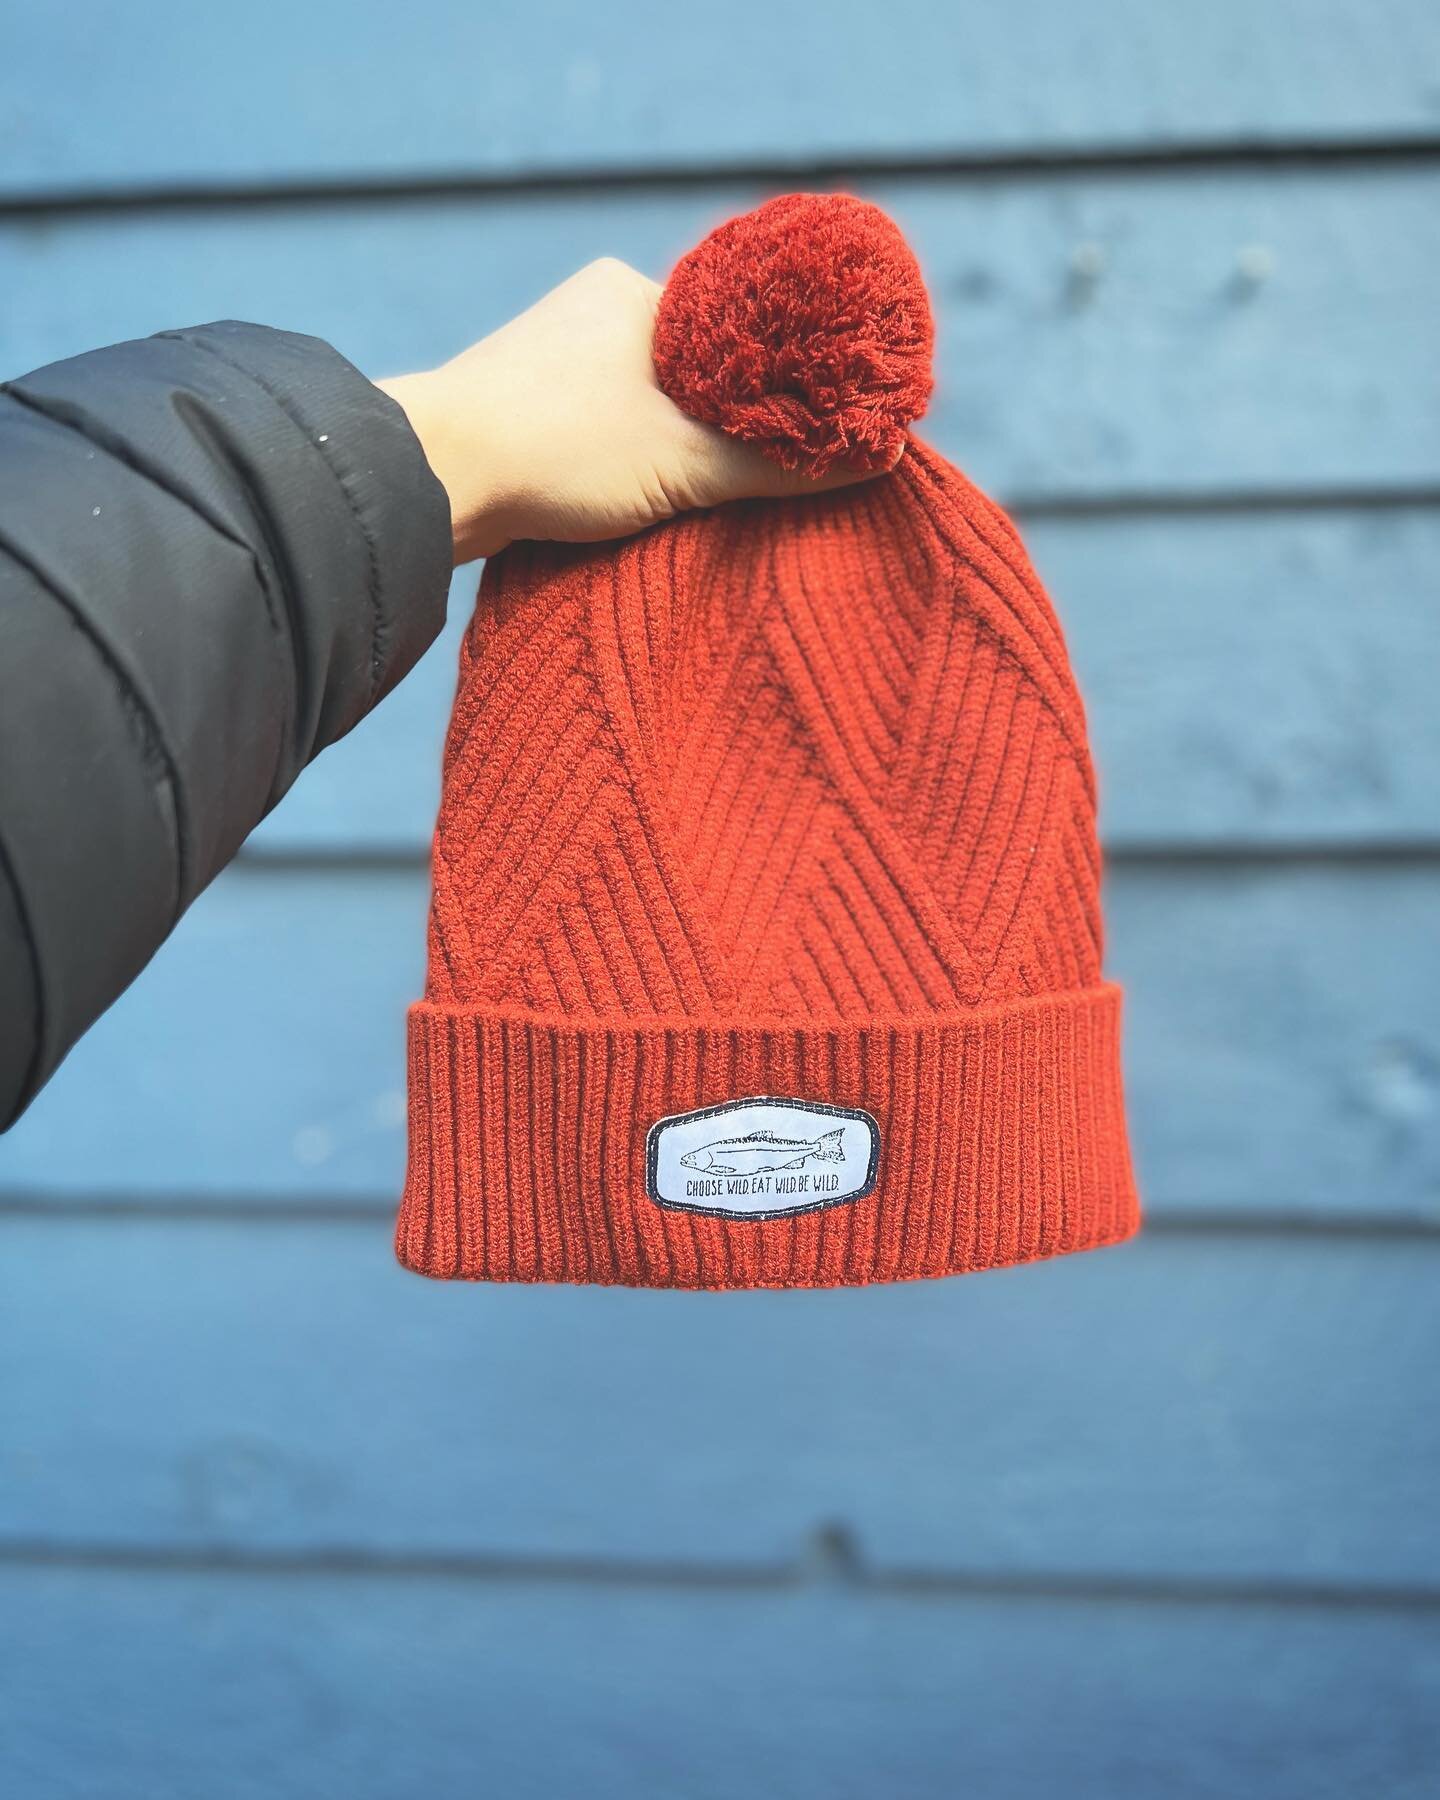 ❄️ Just in time for the BRRR 🥶 months! ❄️
N E W  choose wild beanies have arrived. 🎉🎊 this super soft knit beanie is listed &amp; live on the site.
Don&rsquo;t forget ! Free shipping for any orders over $35 with coupon code : OVER35 🐟⚓️🌀 .
#choo